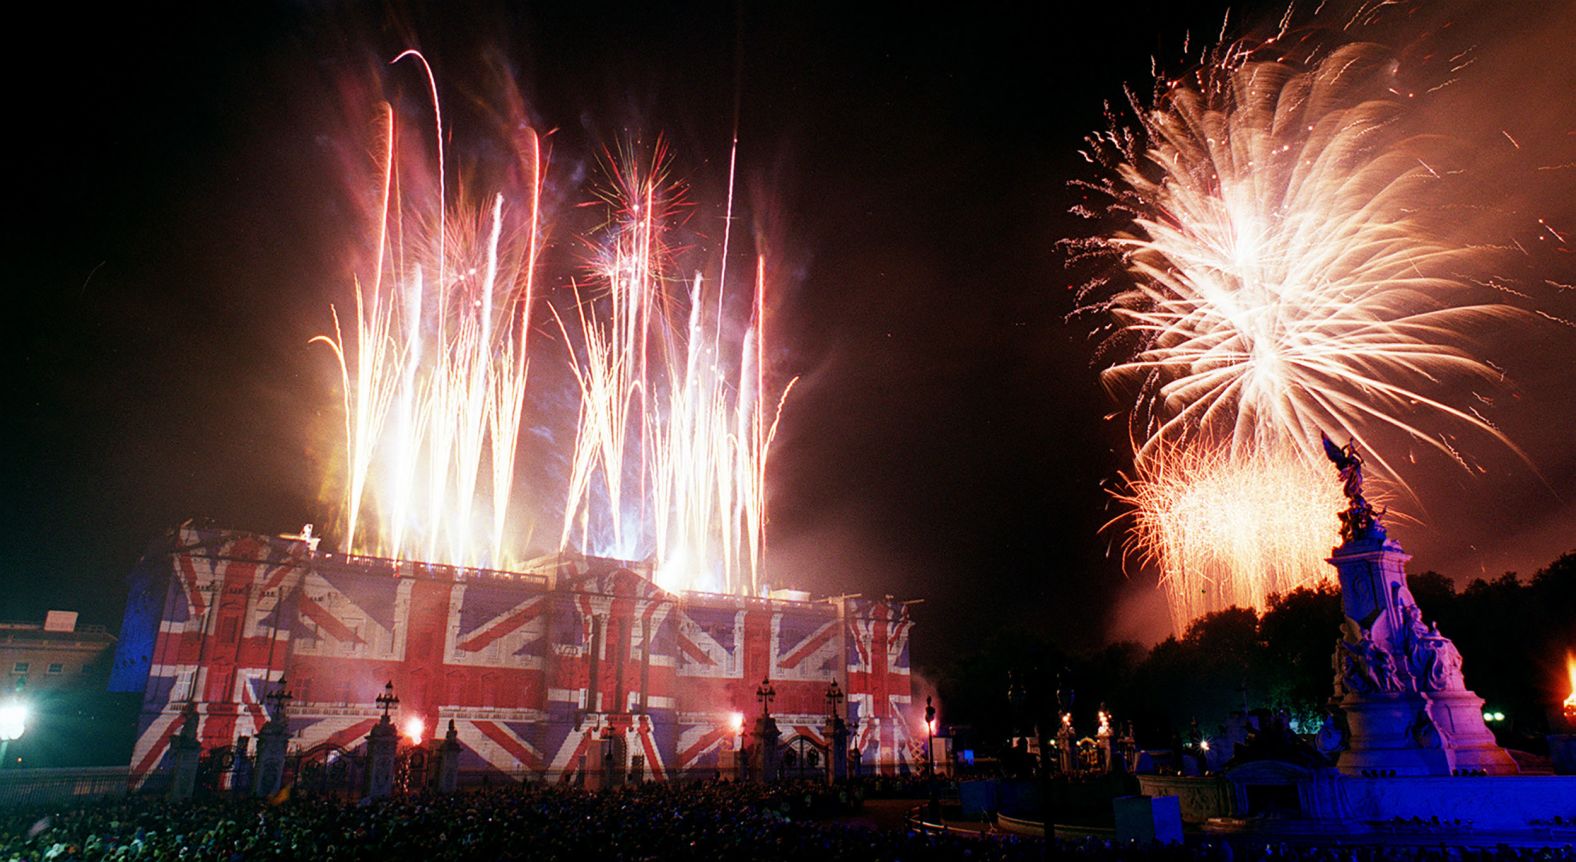 Buckingham Palace is emblazoned with images of the Union Jack flag while fireworks light up the sky after the concert. 